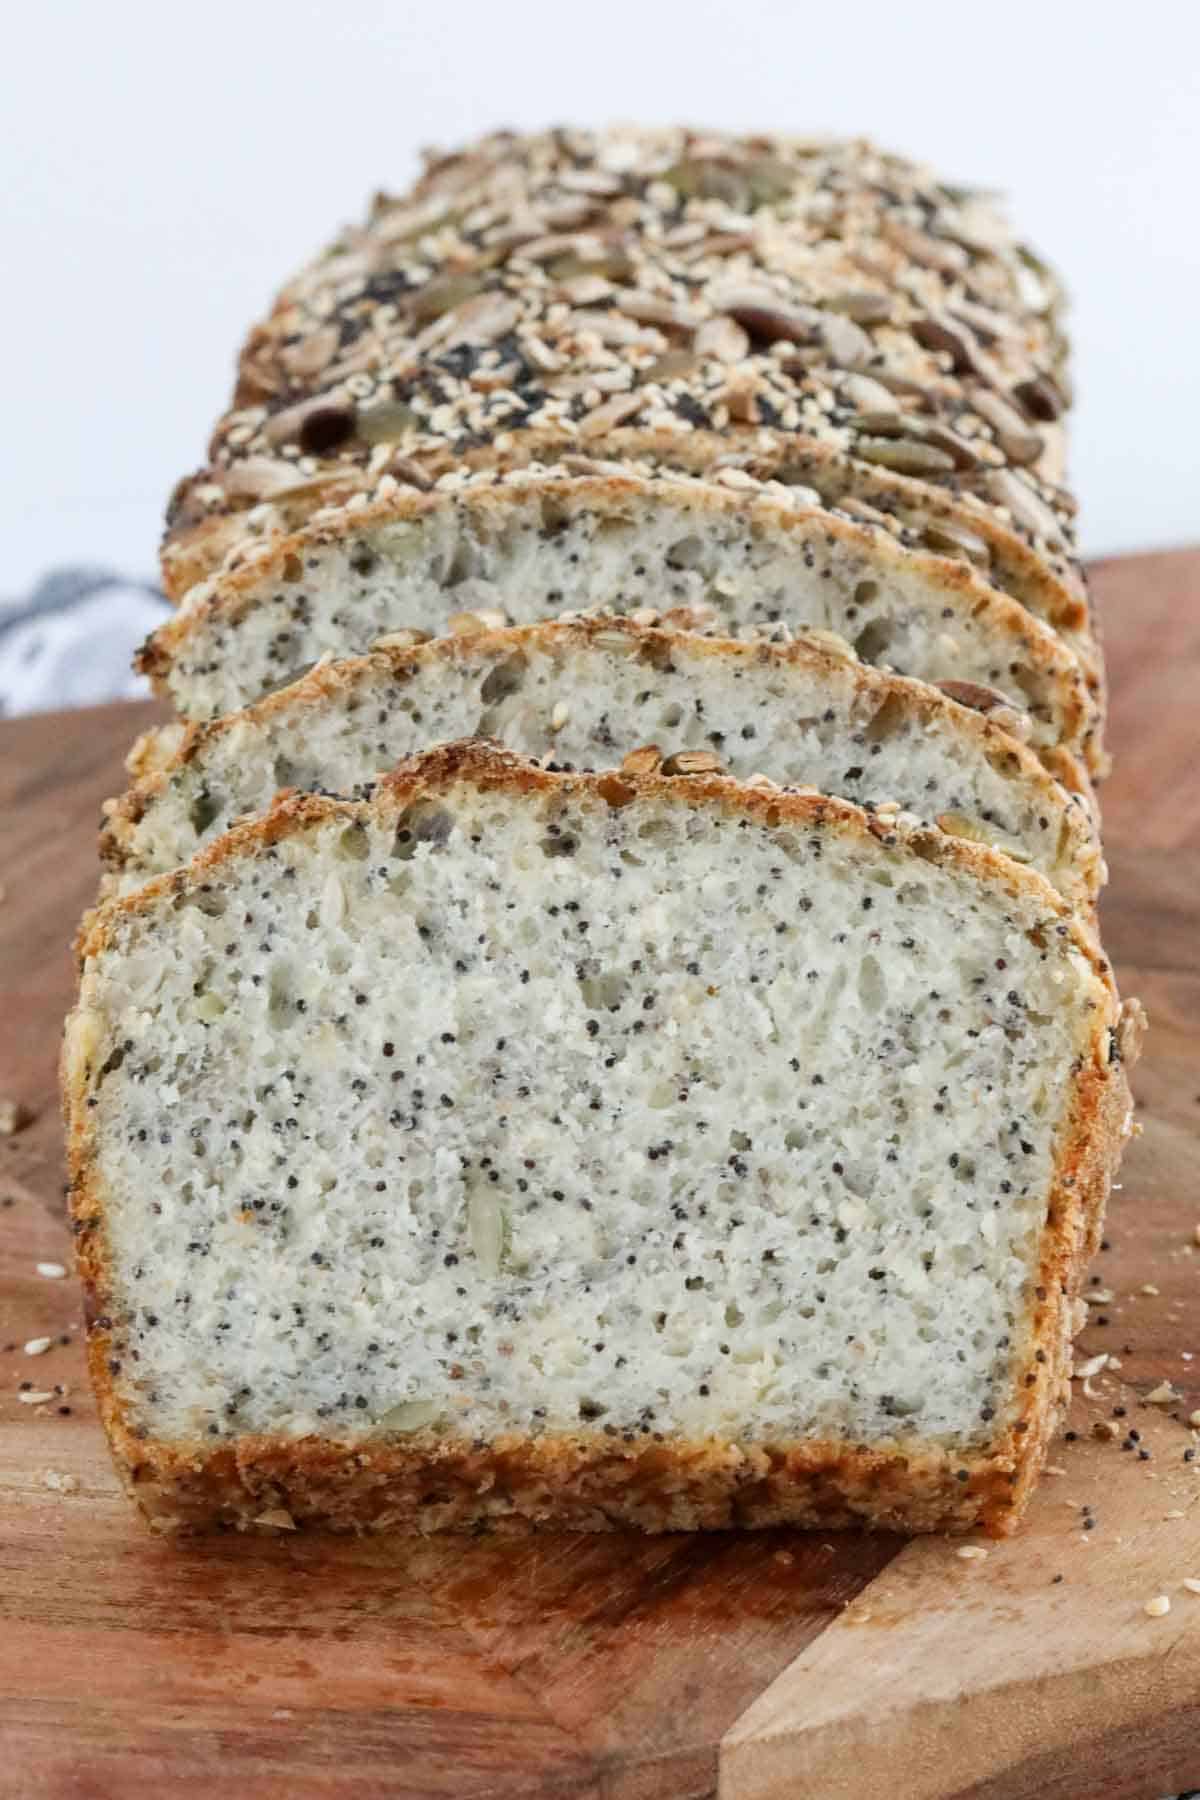 Slices of homemade chia seed bread.